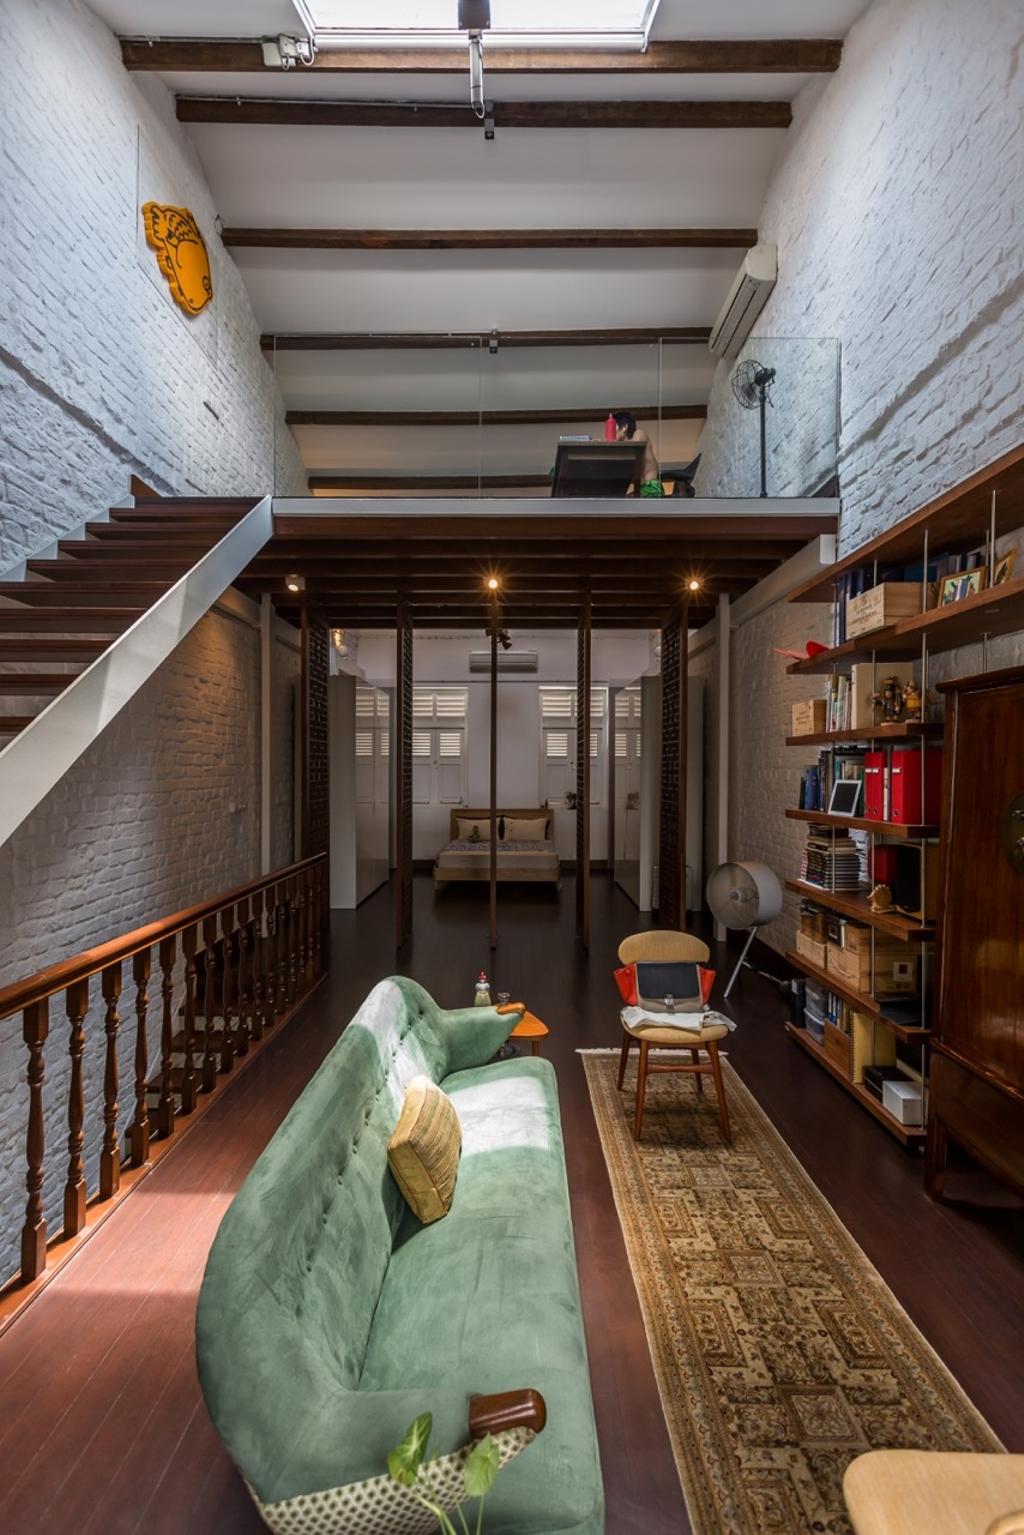 Contemporary, Landed, Living Room, Onan Road, Architect, EZRA Architects, Wooden Flooring, Long Rug, Long Carpet, Blue Sofa, Turquoise Sofa, Brick Wall, Wooden Bookshelf, Wooden Ceiling, Banister, Handrail, Staircase, Shelf, Bookcase, Furniture